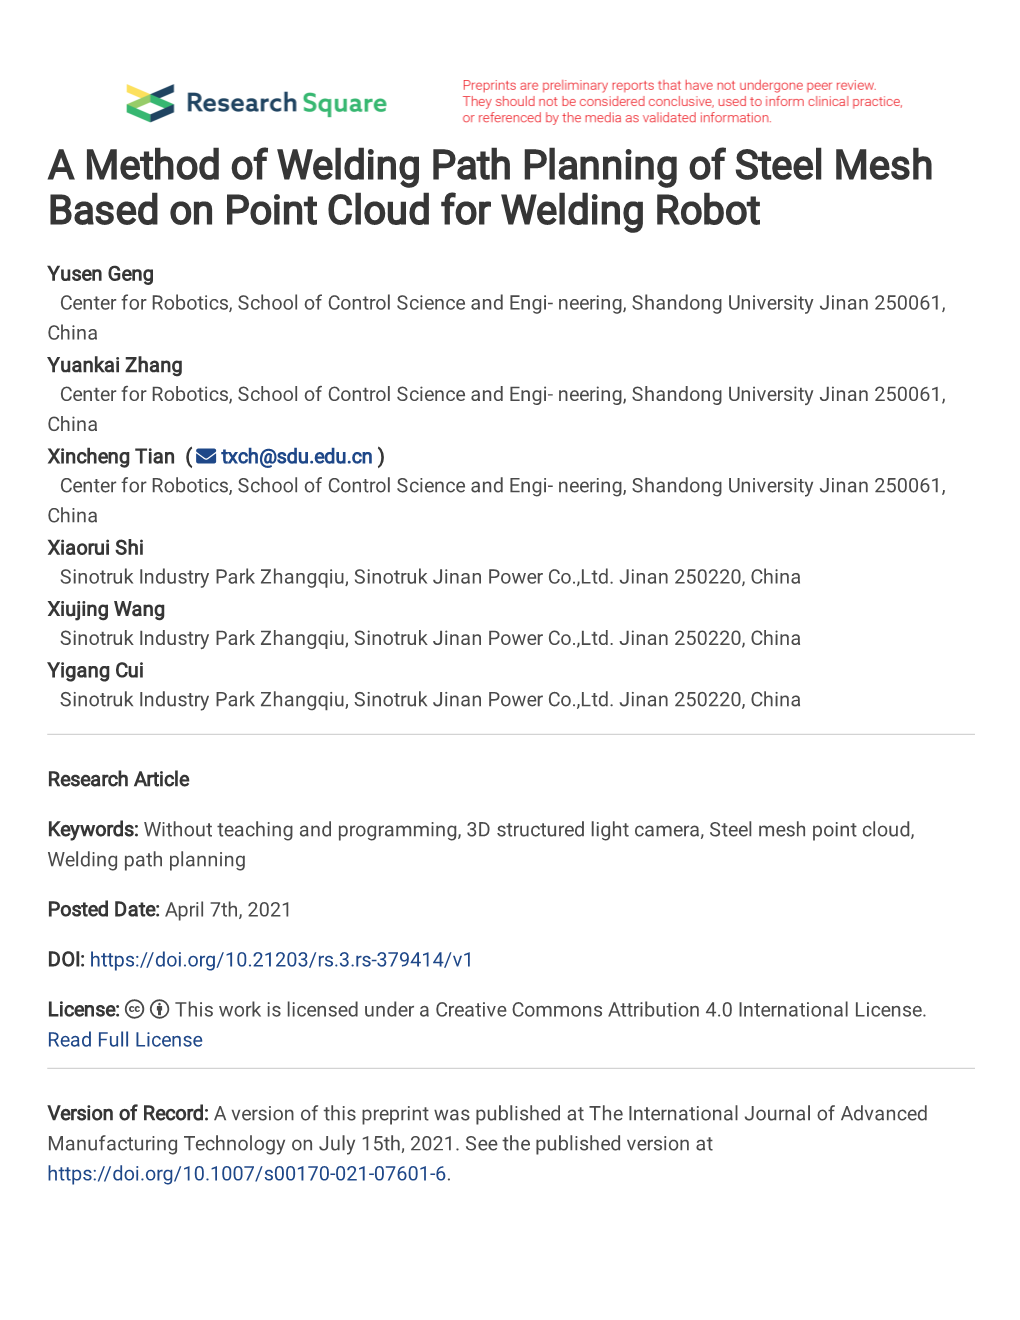 A Method of Welding Path Planning of Steel Mesh Based on Point Cloud for Welding Robot